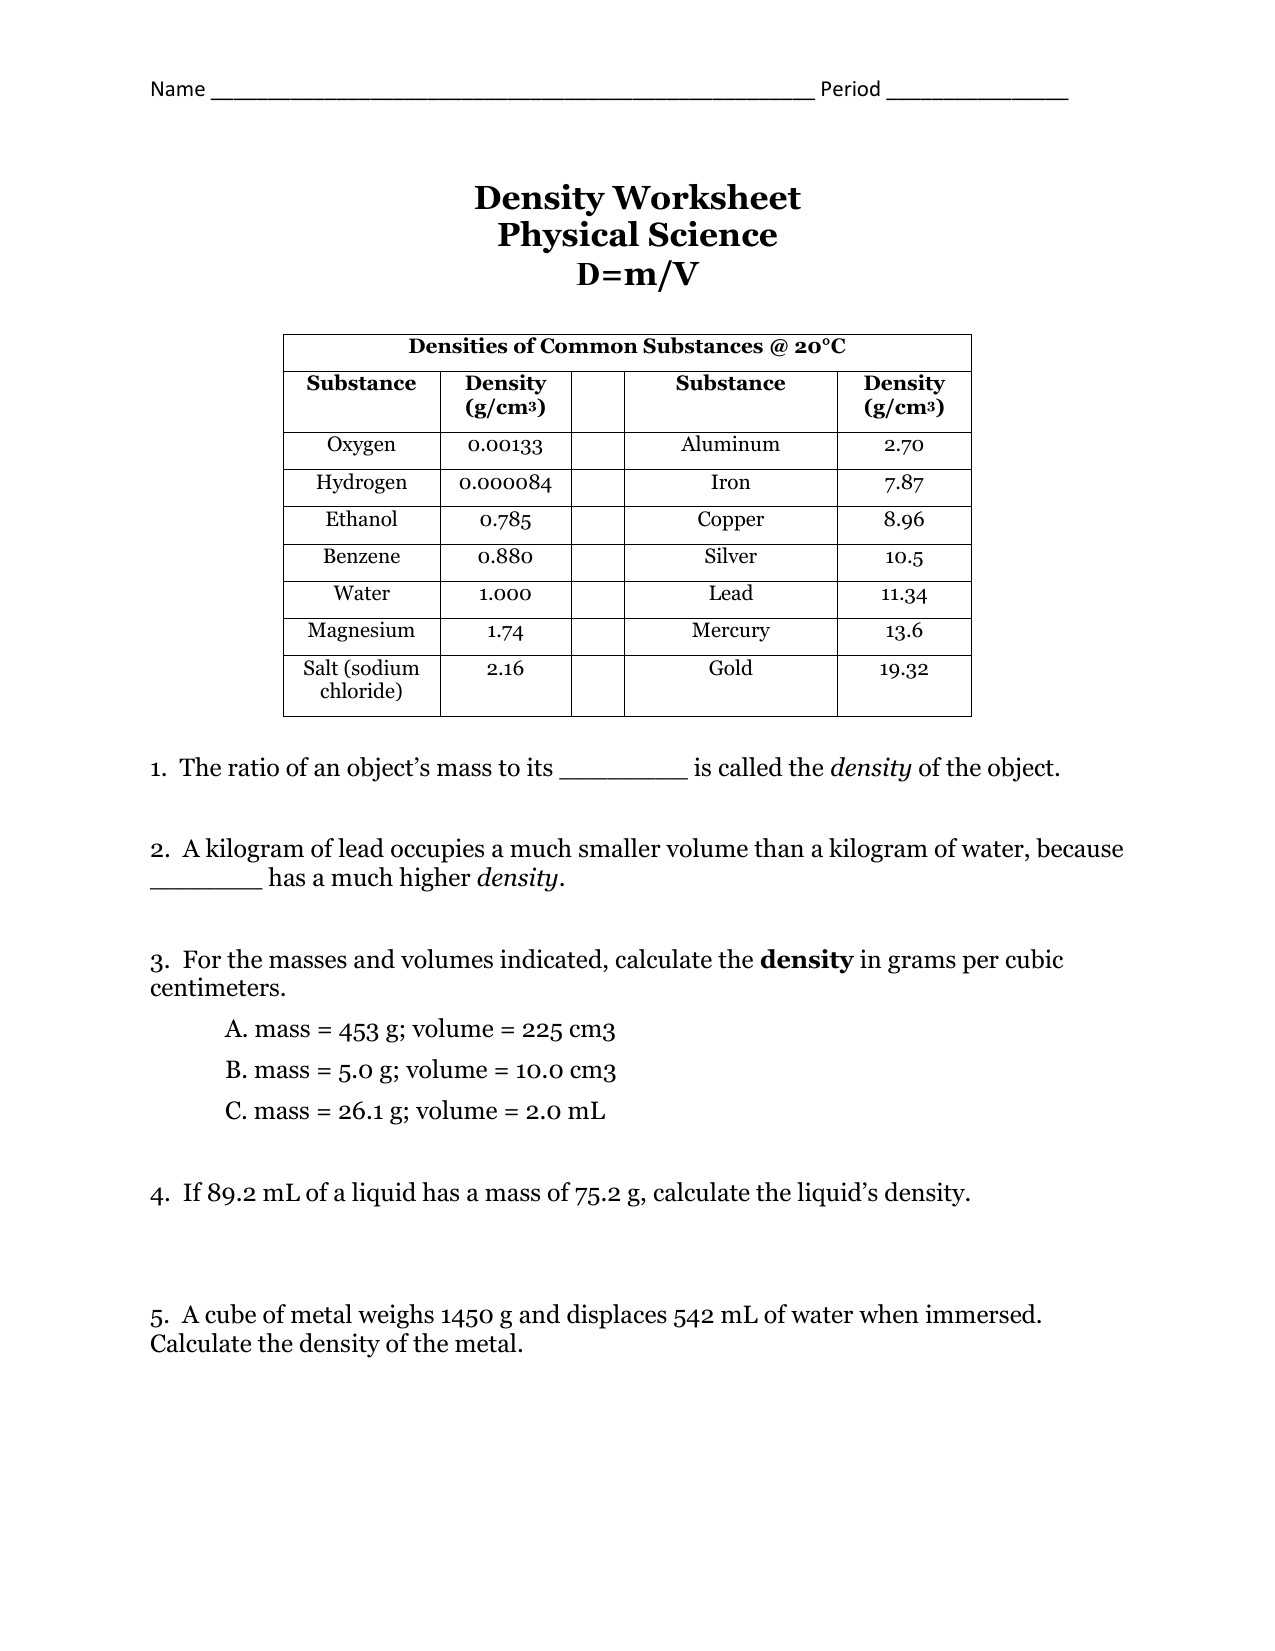 Physical Science Worksheet Conservation Of Energy 2 Answer Key as Well as 23 Luxury Energy Transformation Worksheet Answer Key